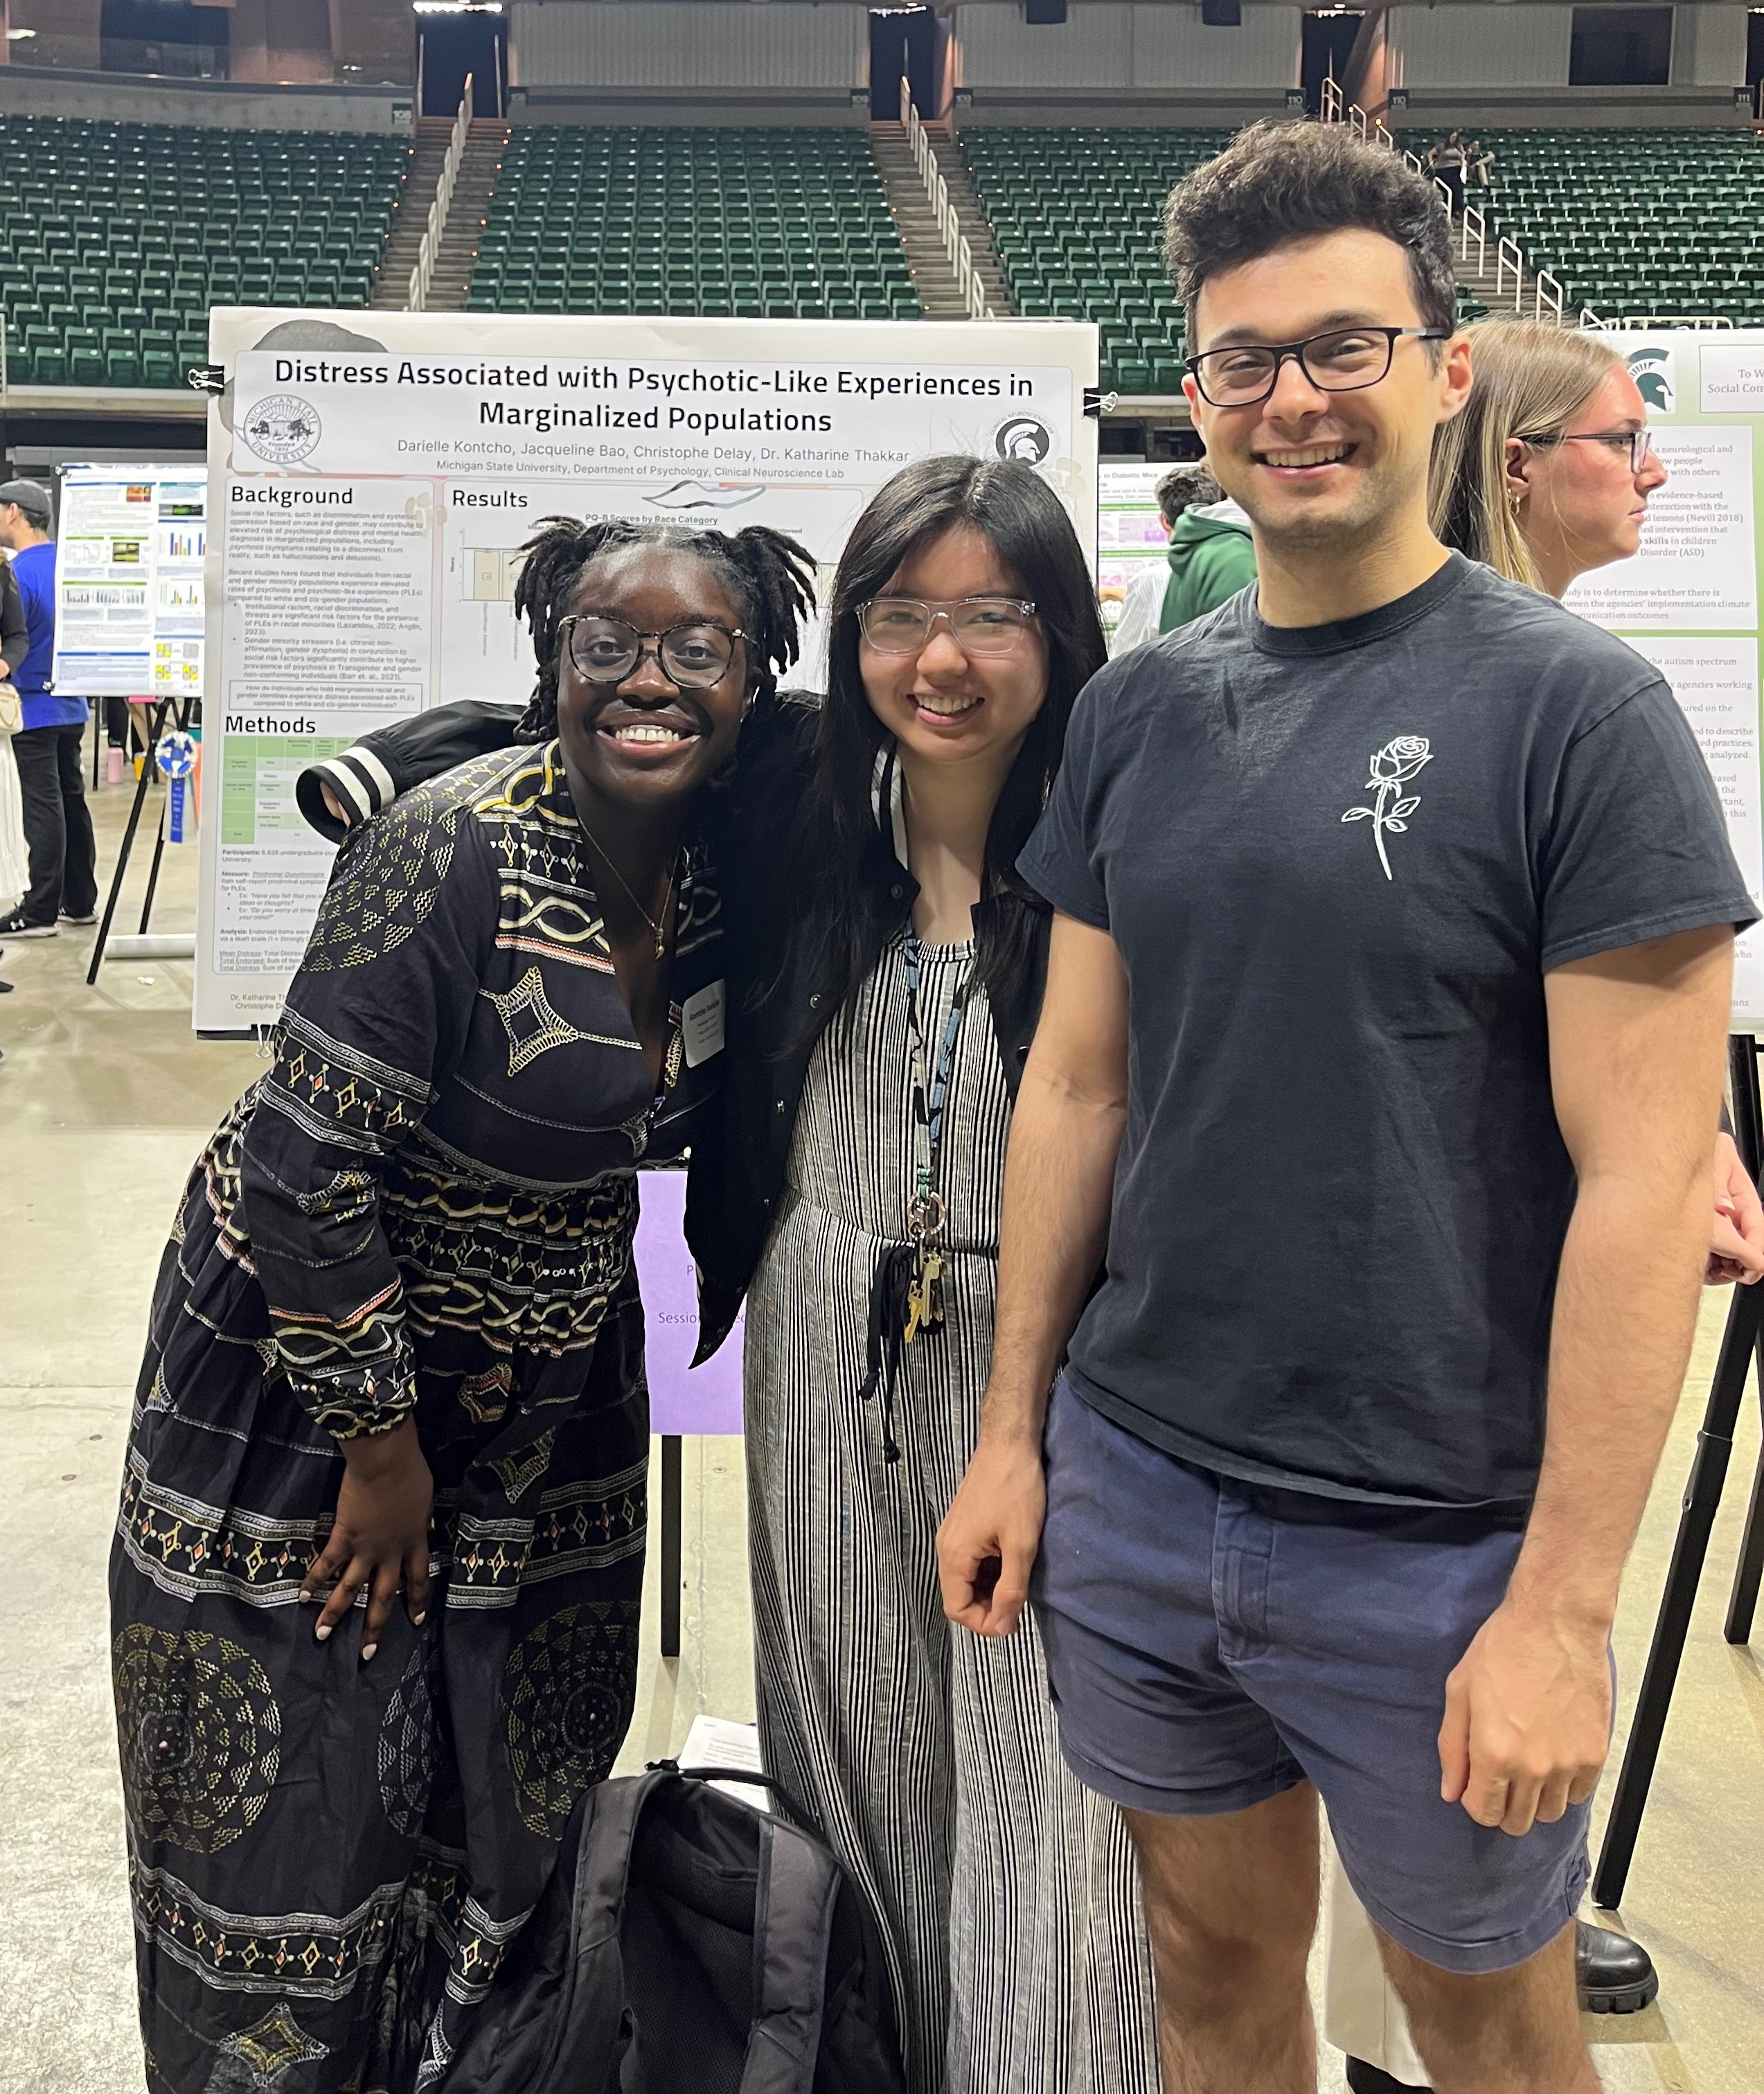 Members of the Clinical Neuroscience Lab stand with Darielle Kontcho and her poster at UURAF